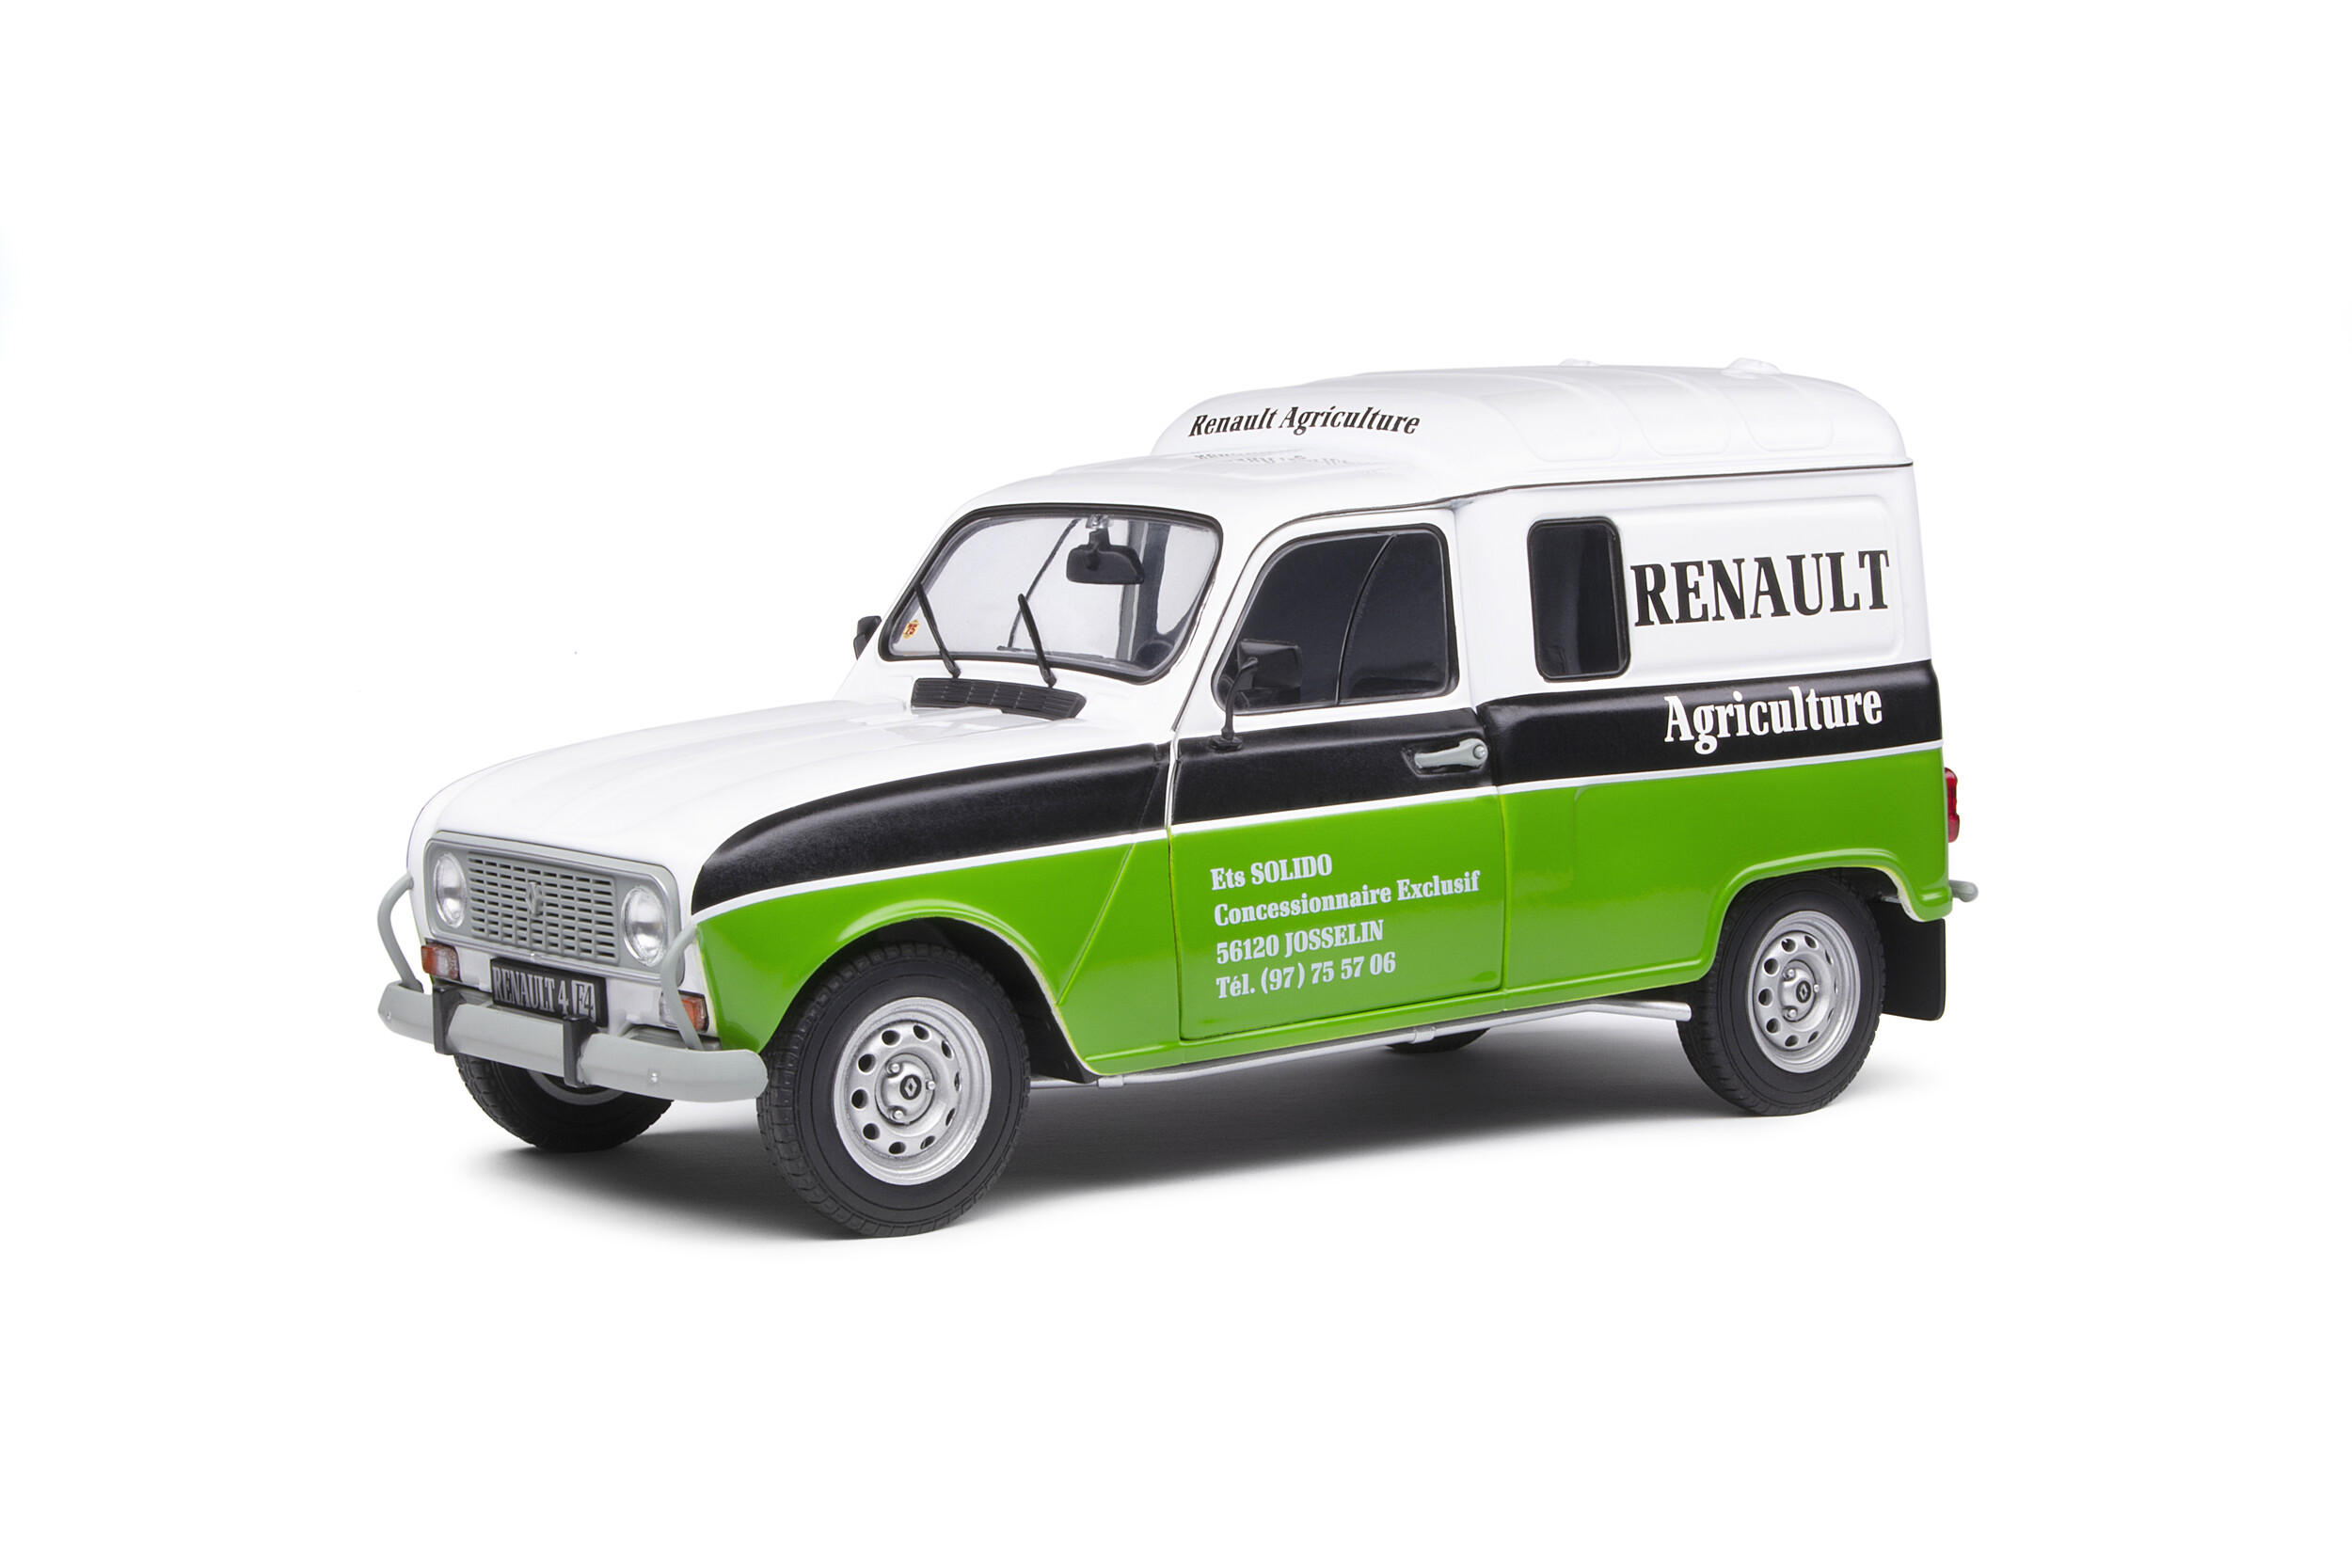 RENAULT 4L F4 RENAULT AGRICULTURE 1988 1:18 Solido